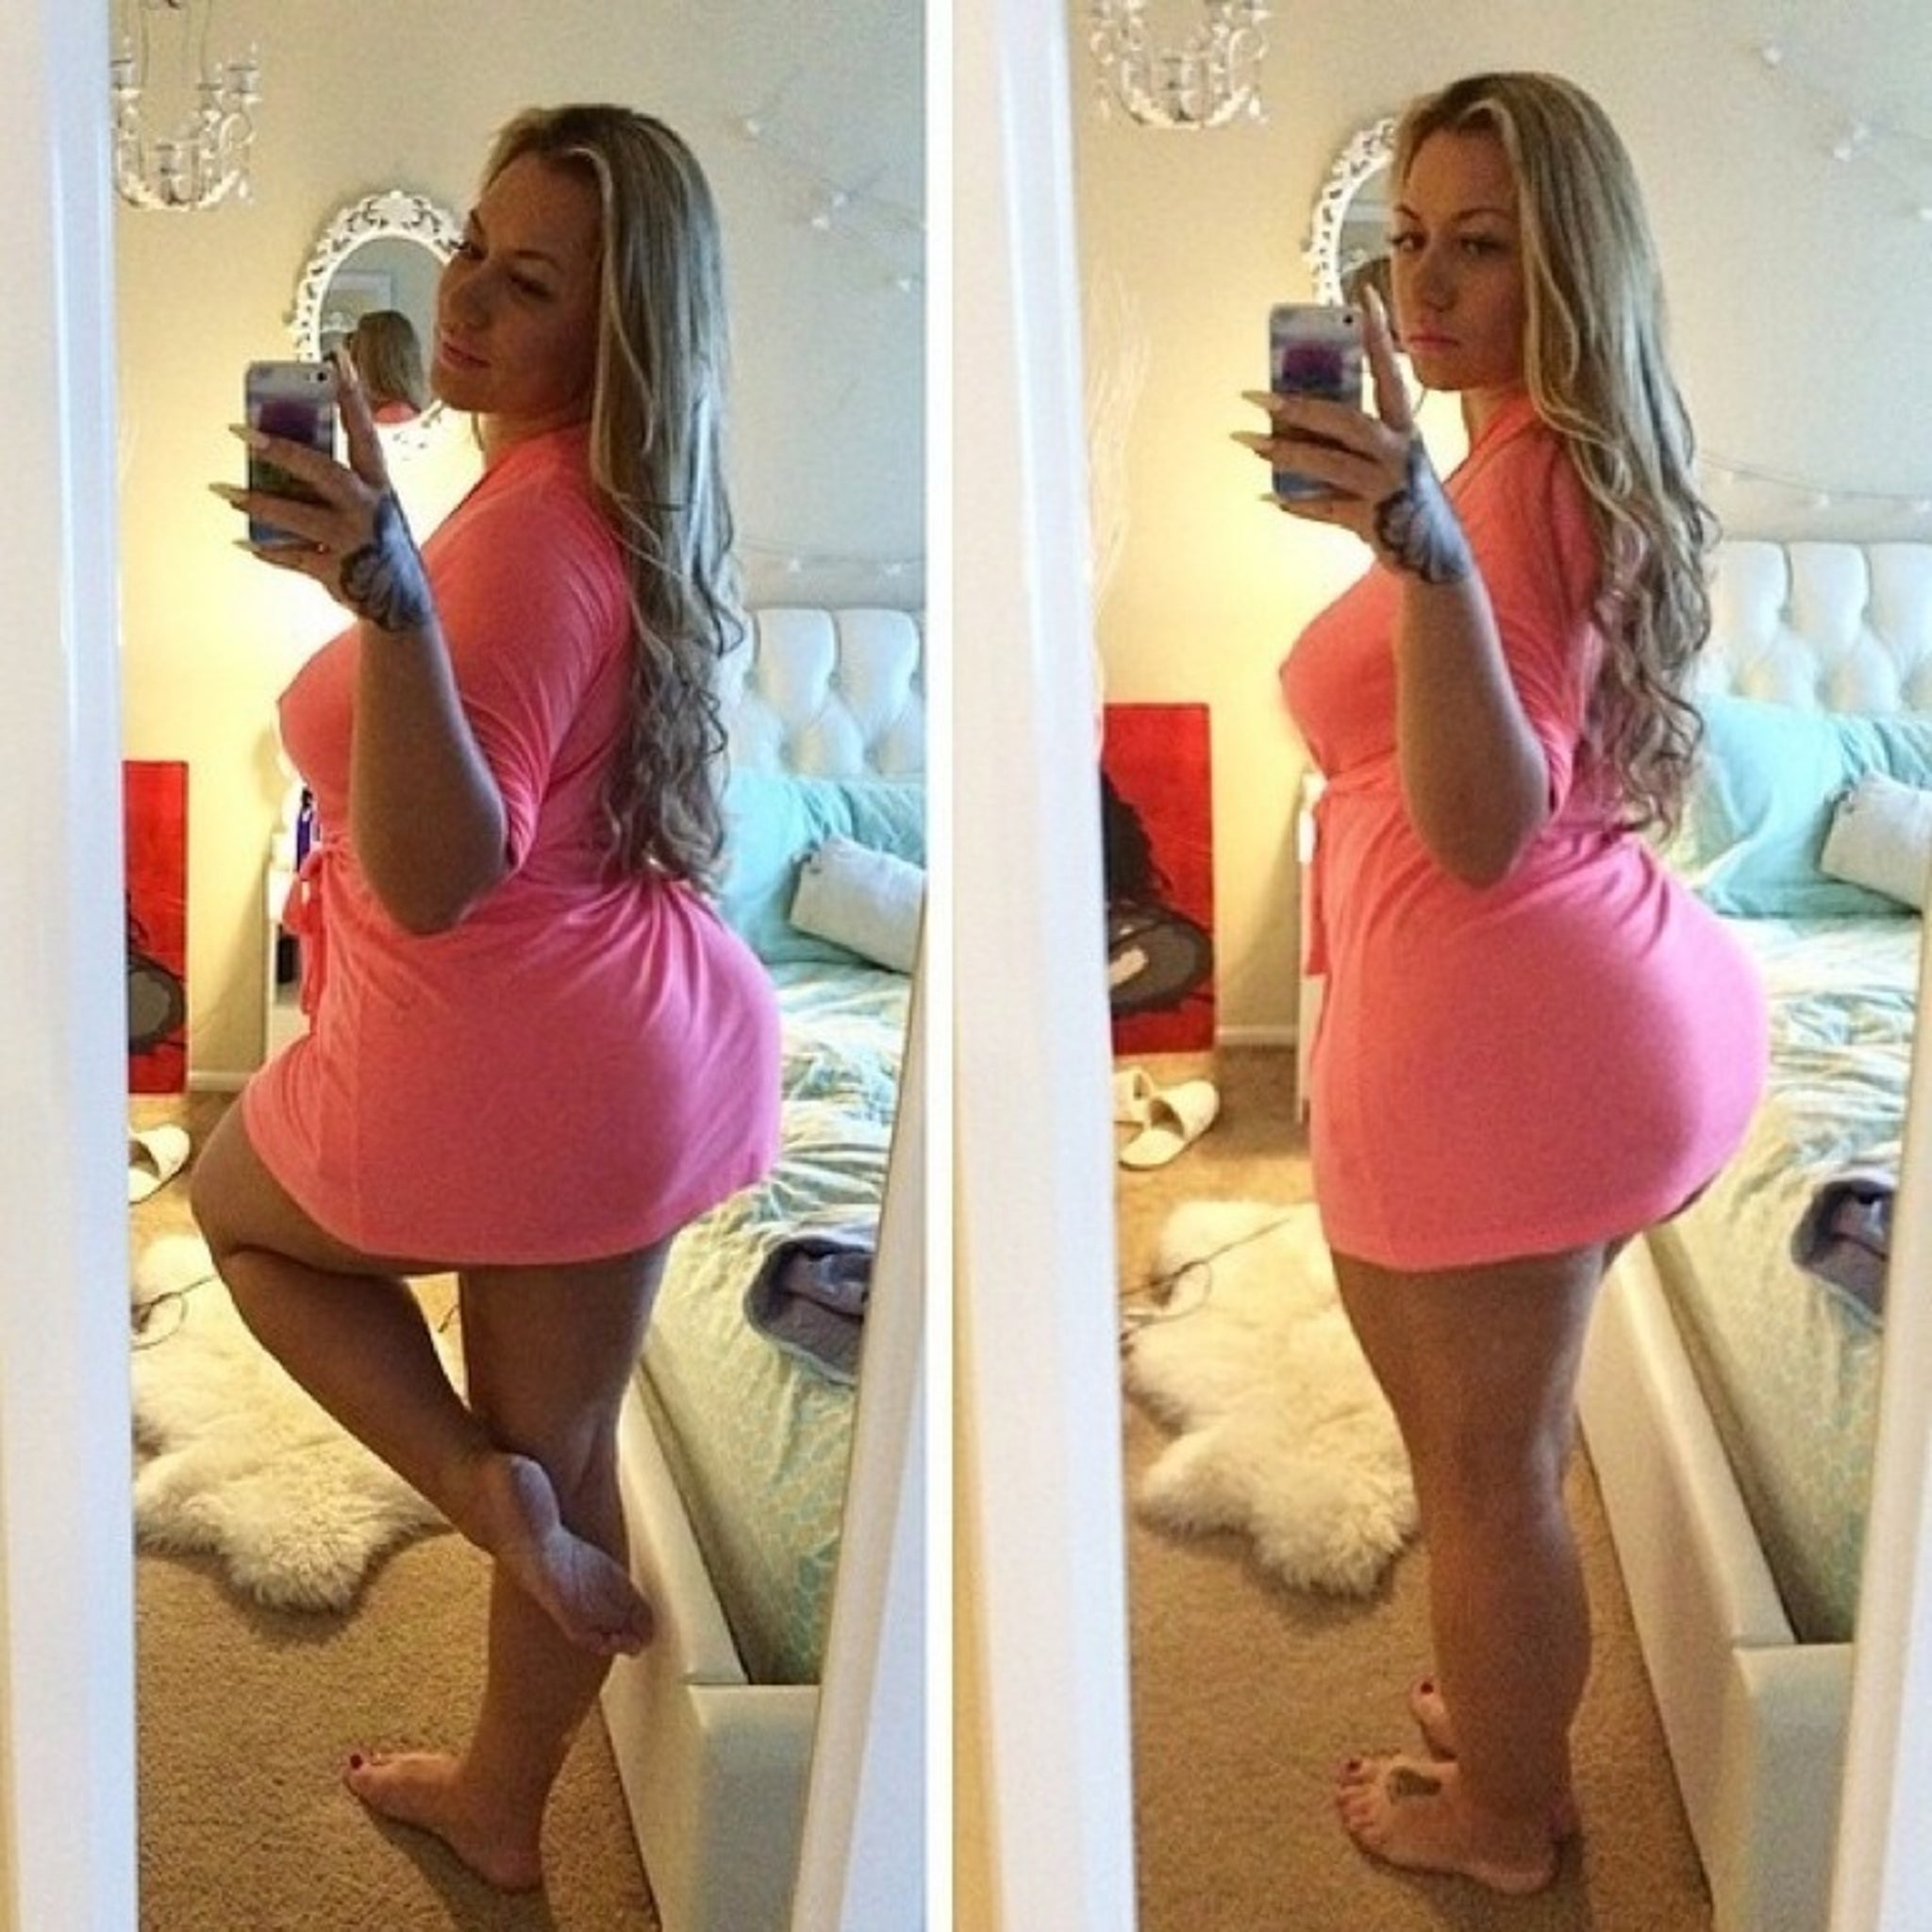 Elke the Stallion -- Strikes a Big Blow for Bubble Butt Equality